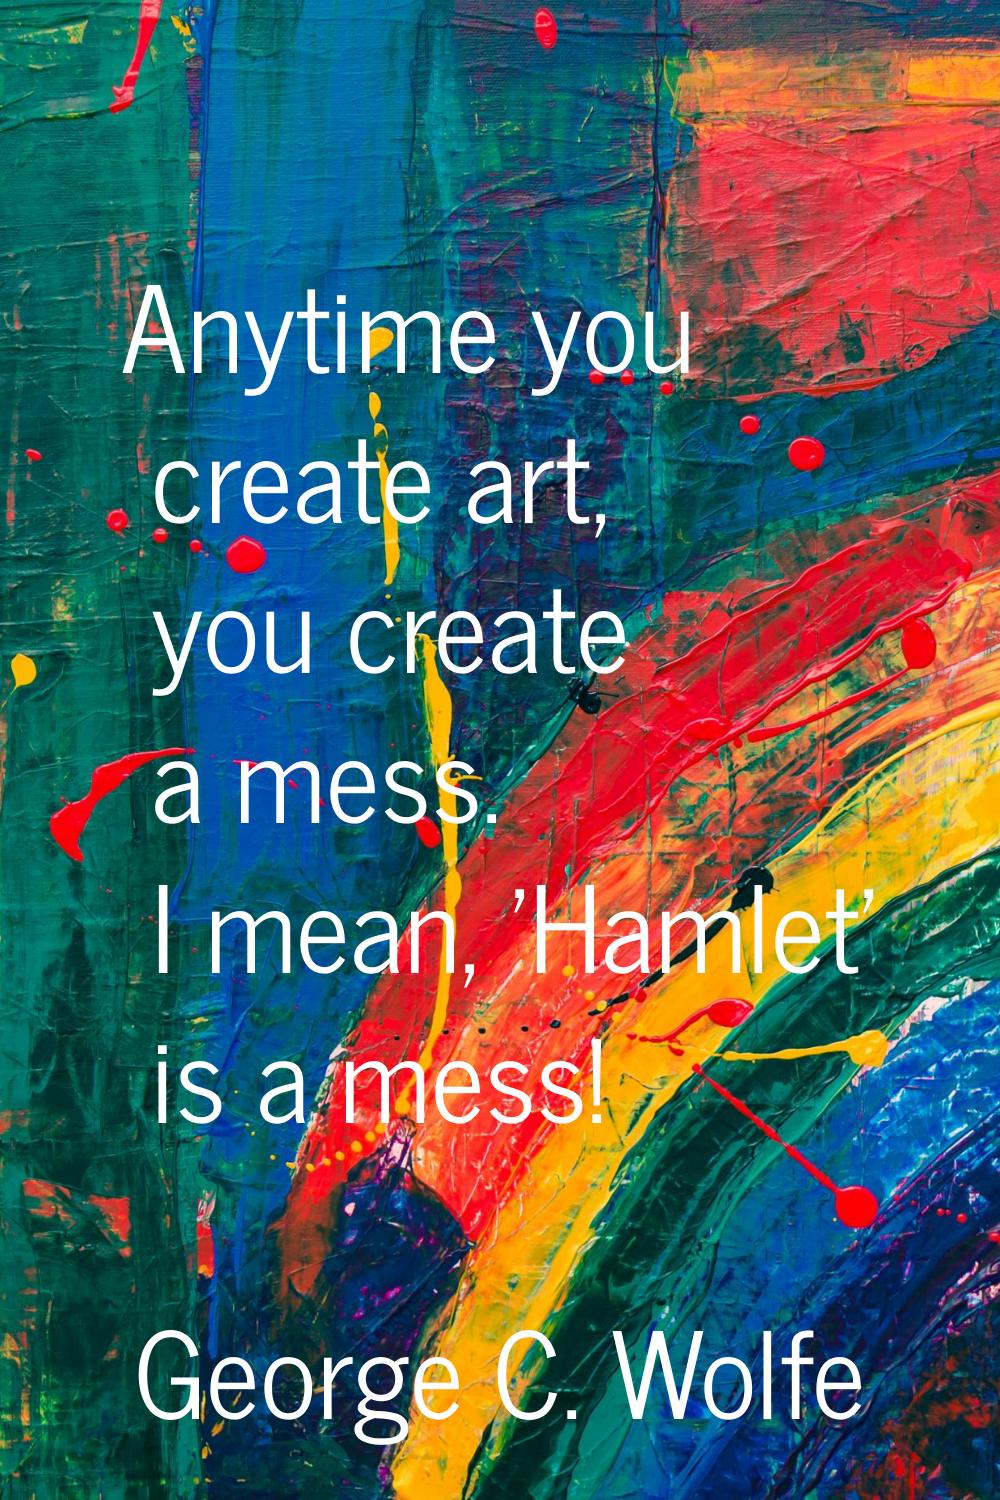 Anytime you create art, you create a mess. I mean, 'Hamlet' is a mess!